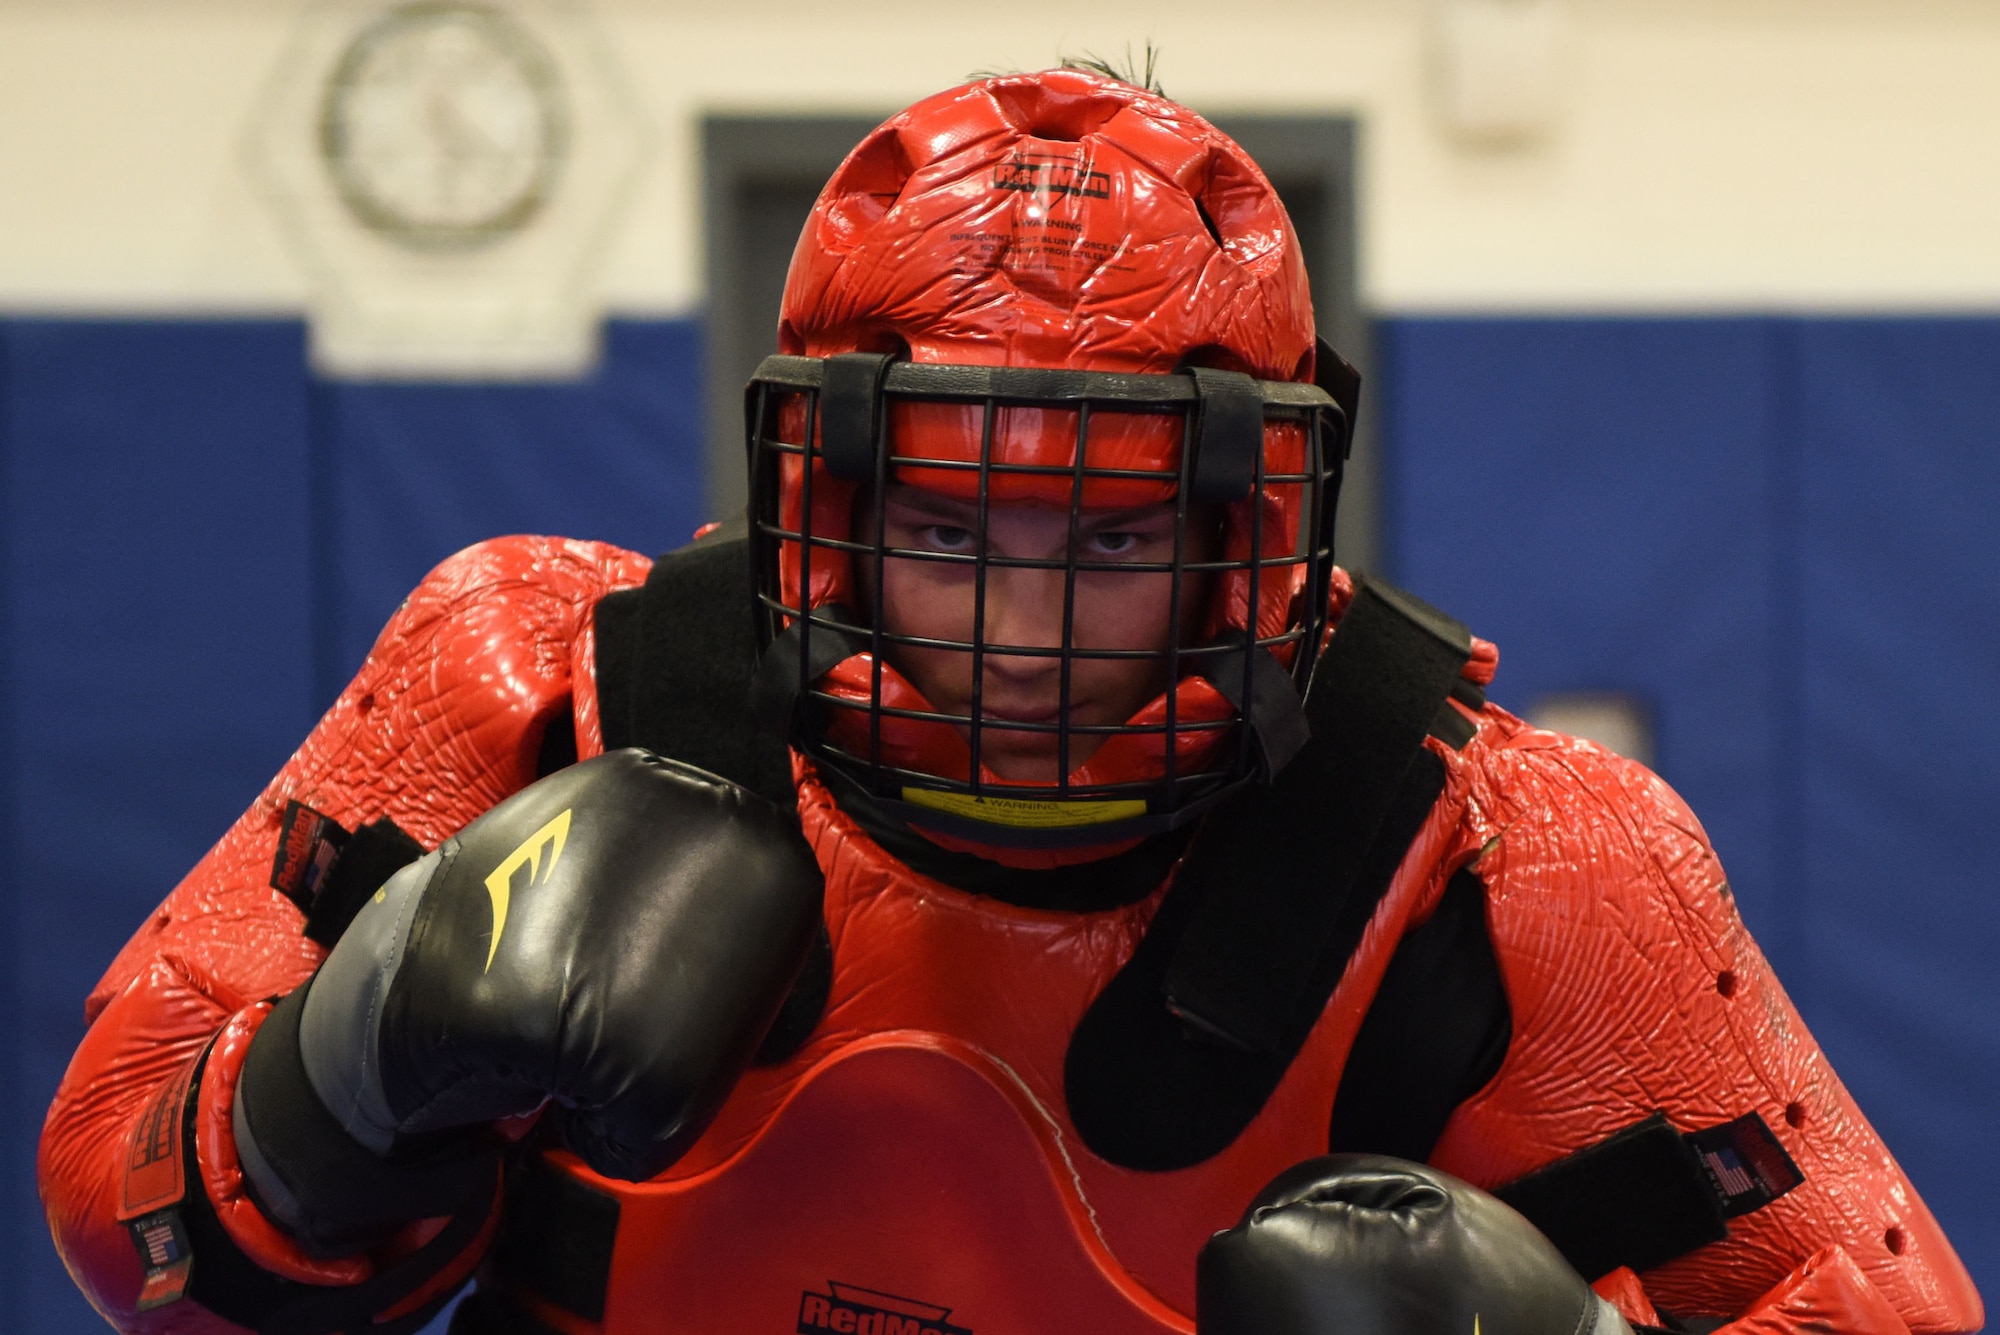 Staff Sgt. Michael Rice, 436th Security Forces Squadron Raven, wears the “Red Man” suit during a demonstration March 8, 2018, at Central Middle School in Dover, Del. Rice served as the aggressor in the sparing sessions while his opponents used batons to defend themselves.  (U.S. Air Force Photo by Airman 1st Class Zoe M. Wockenfuss)